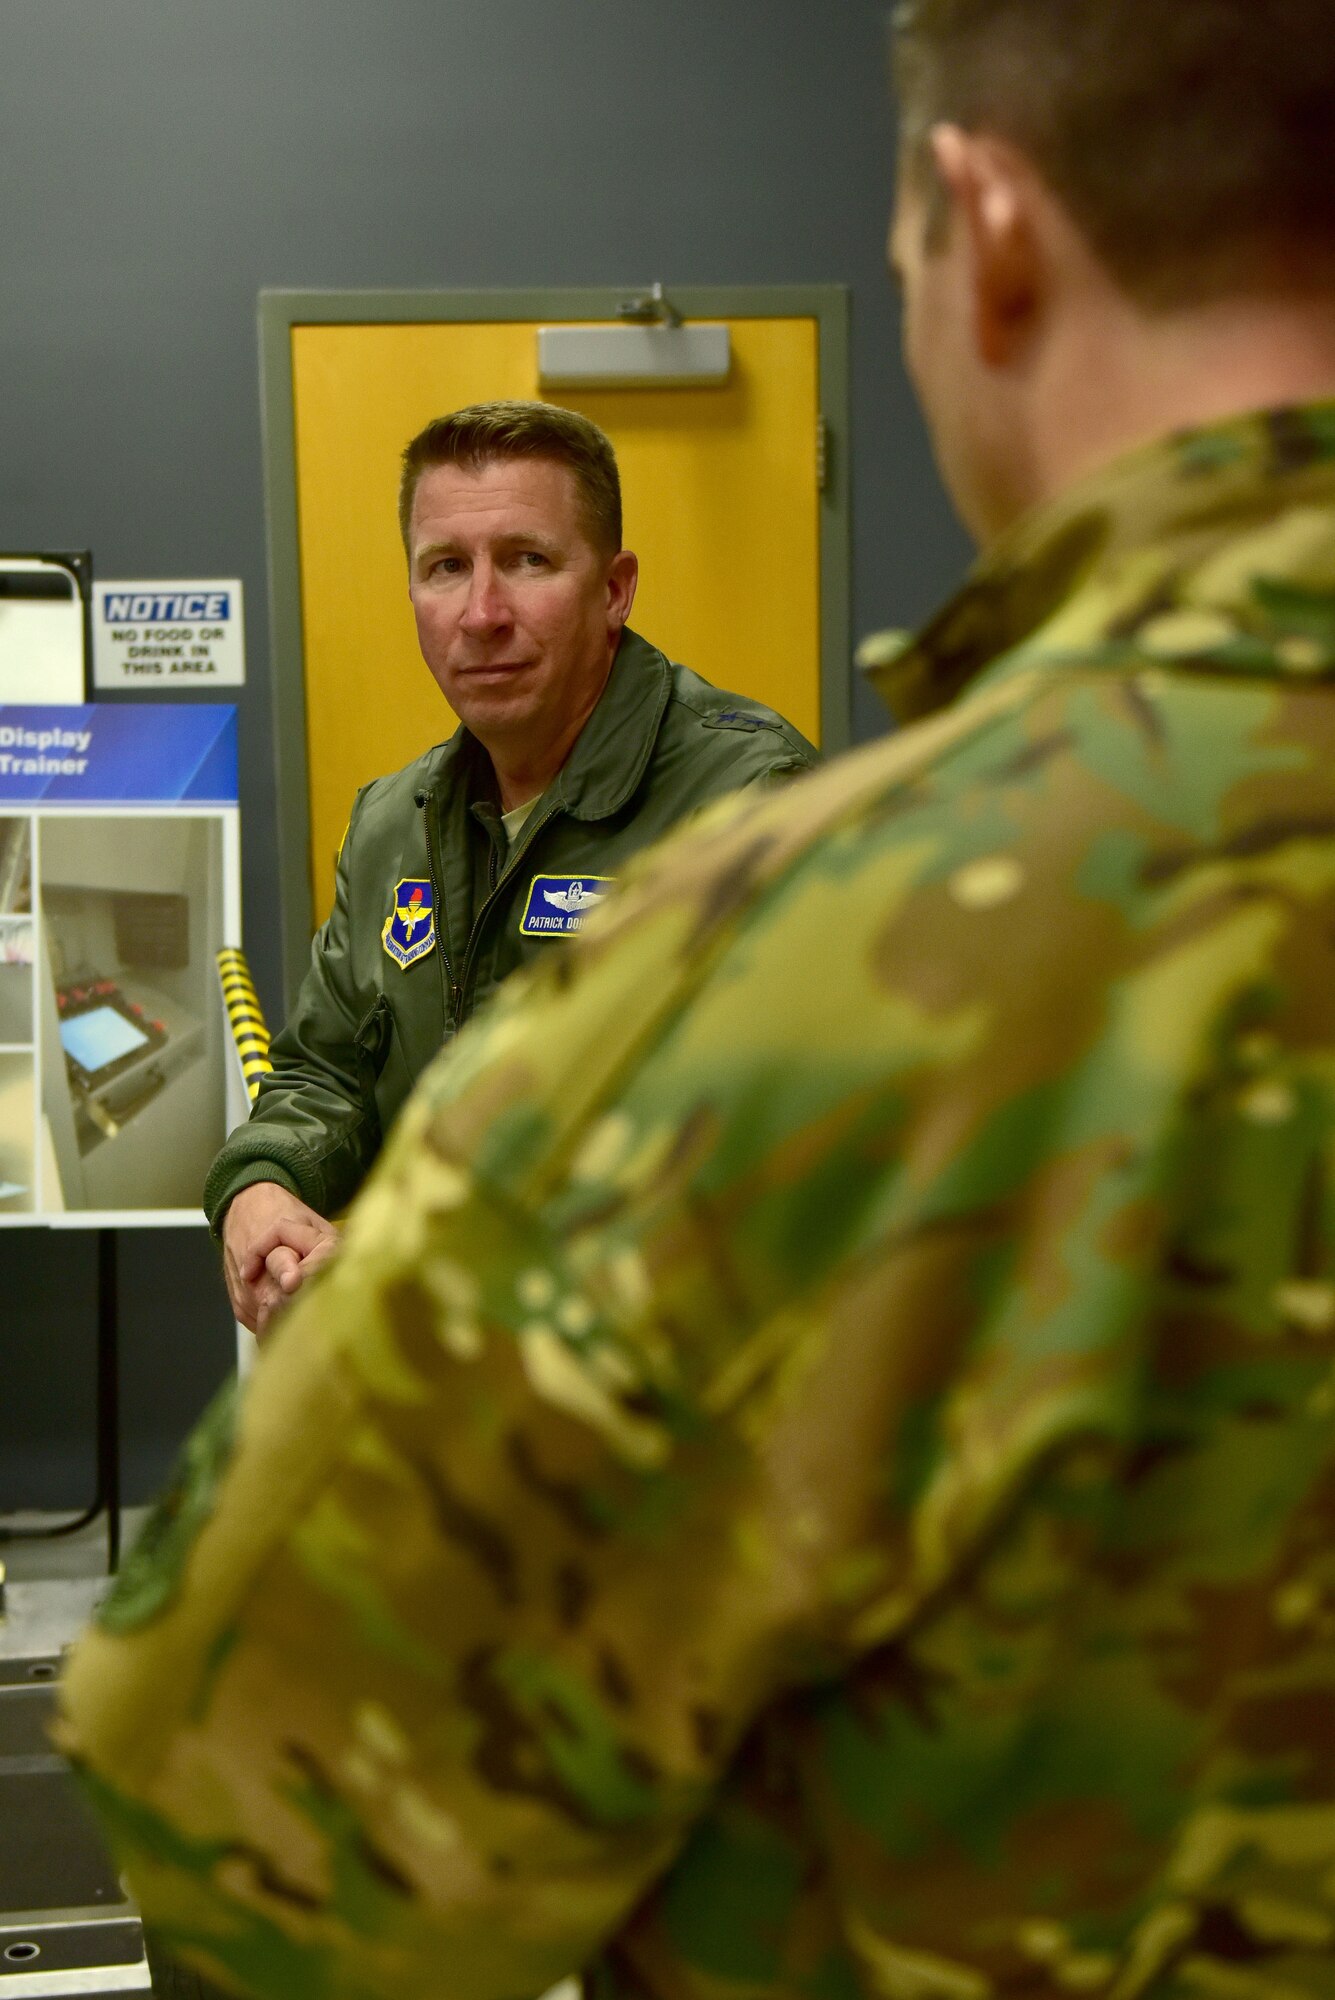 A man wearing the Air Force flight suite talks to a man wearing the operational camouflage uniform.